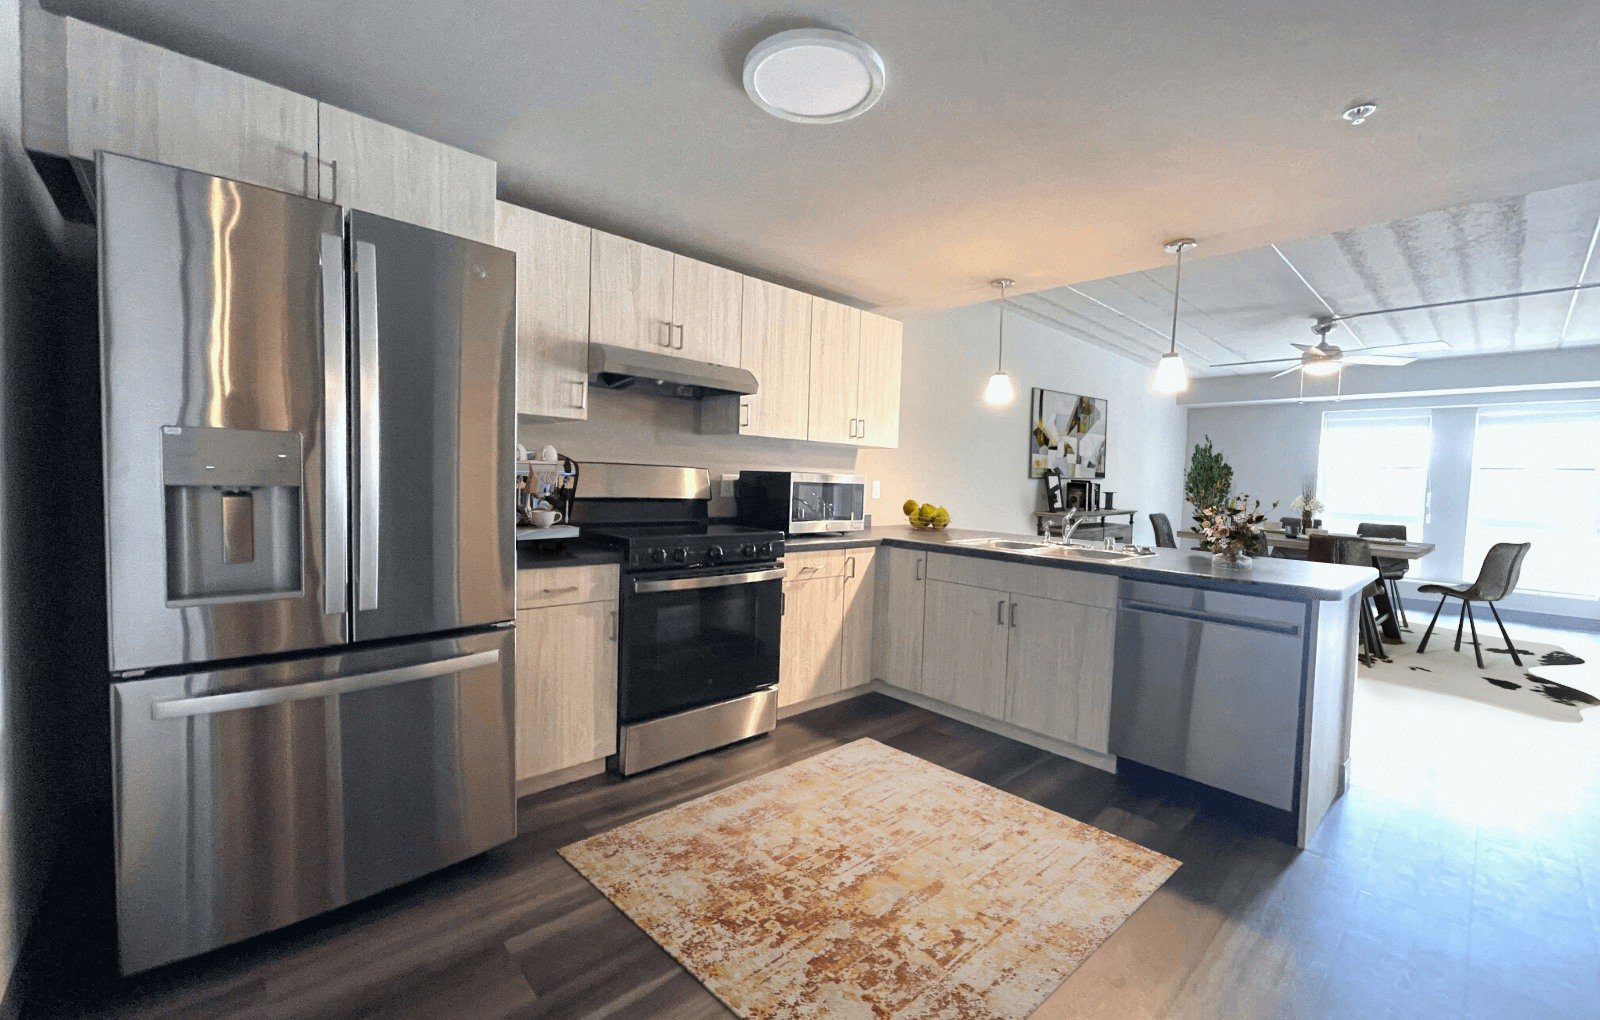 Kitchens feature Stainless Appliances and lots of Cupboards